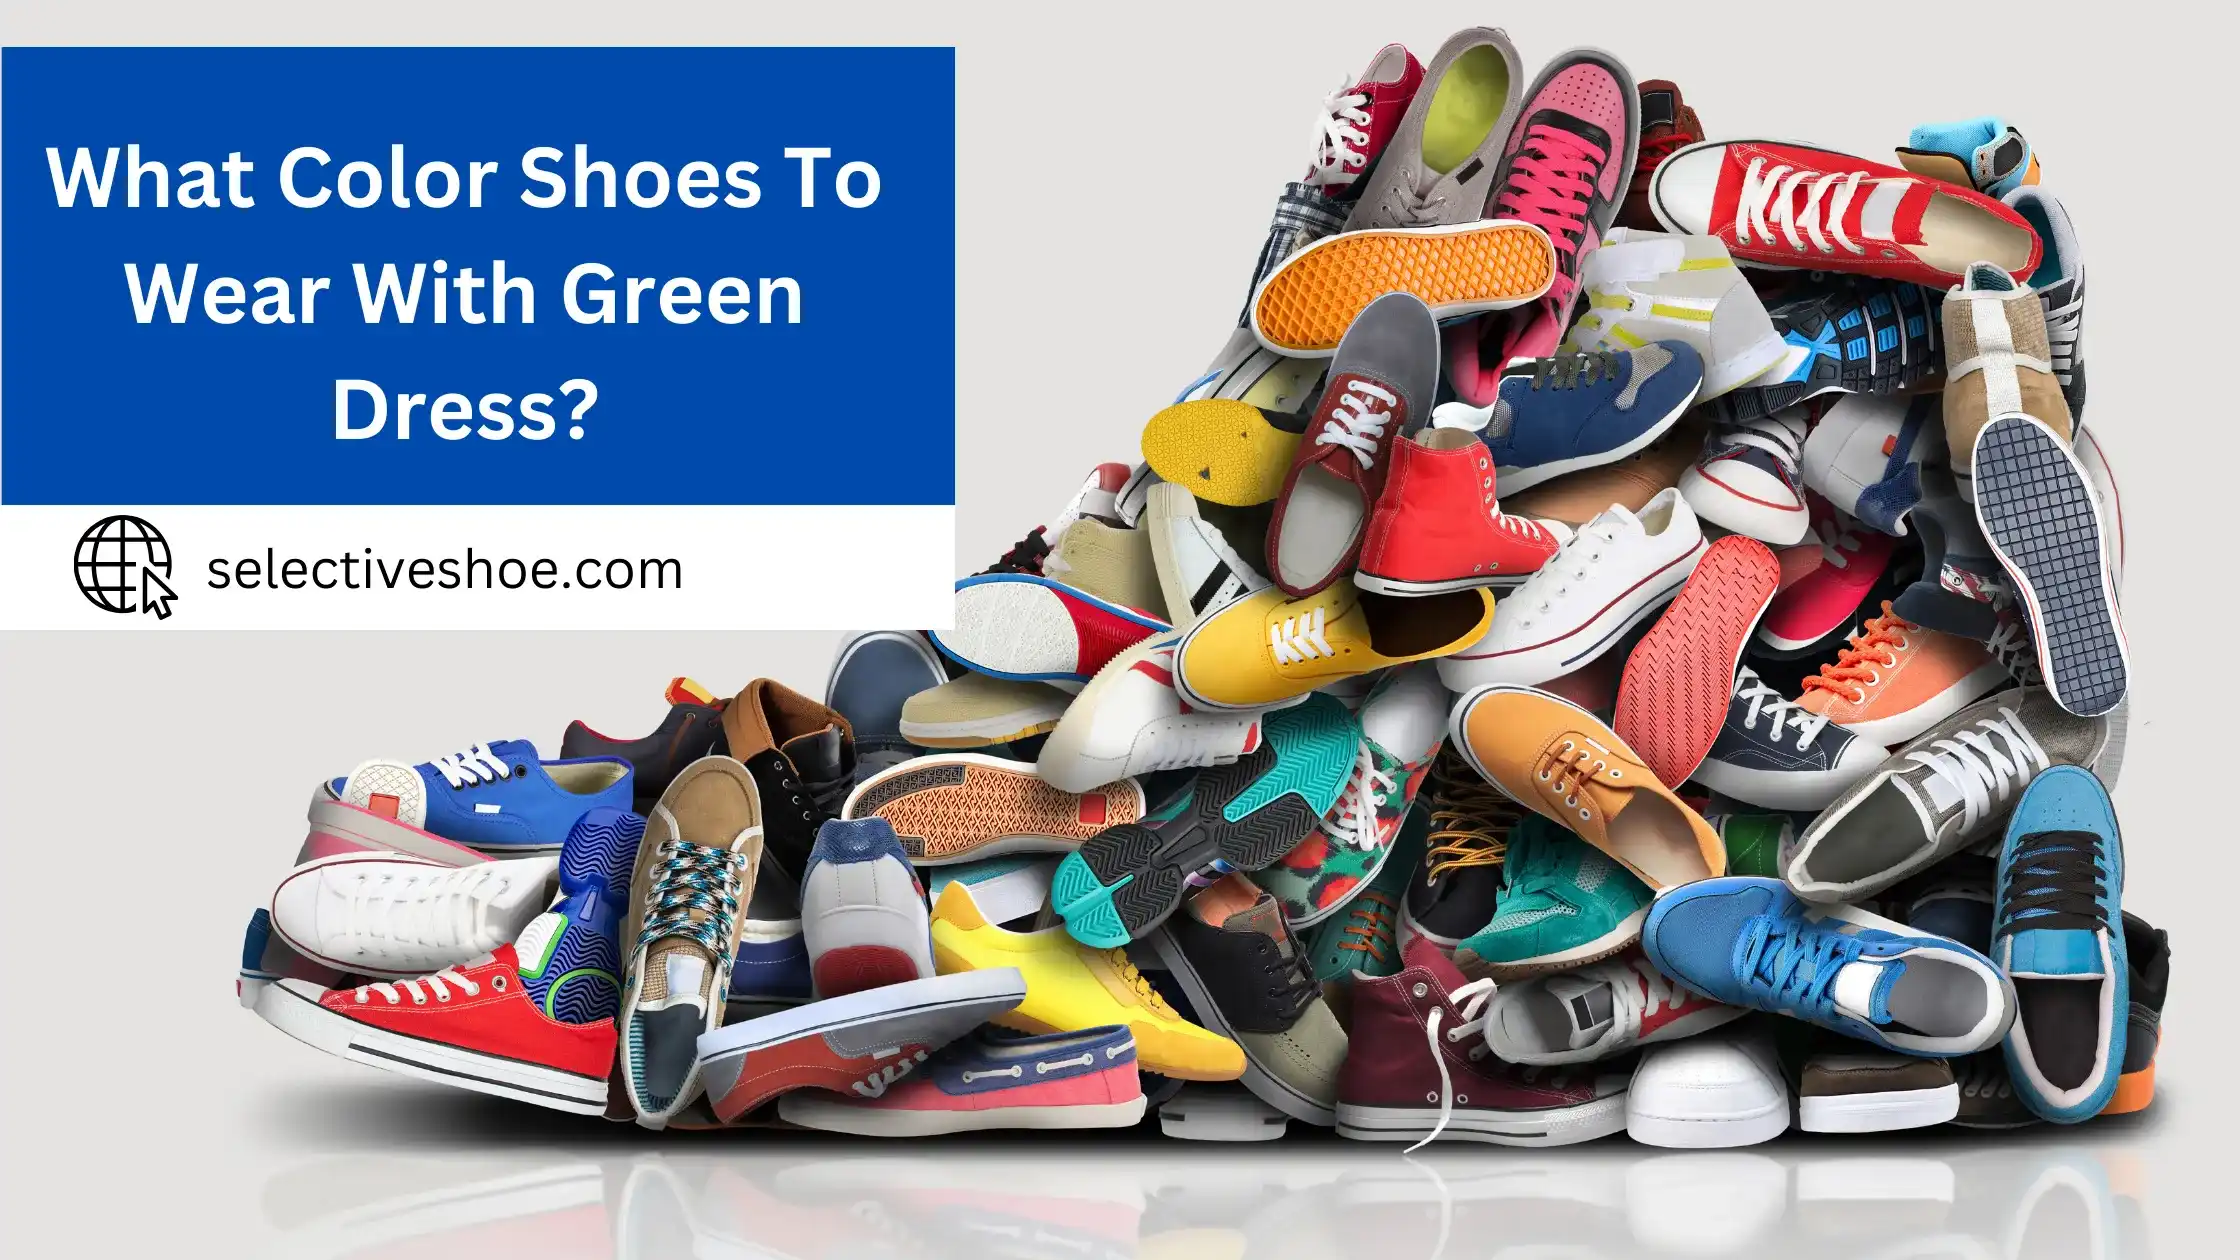 What Color Shoes To Wear With Green Dress? Best Explained